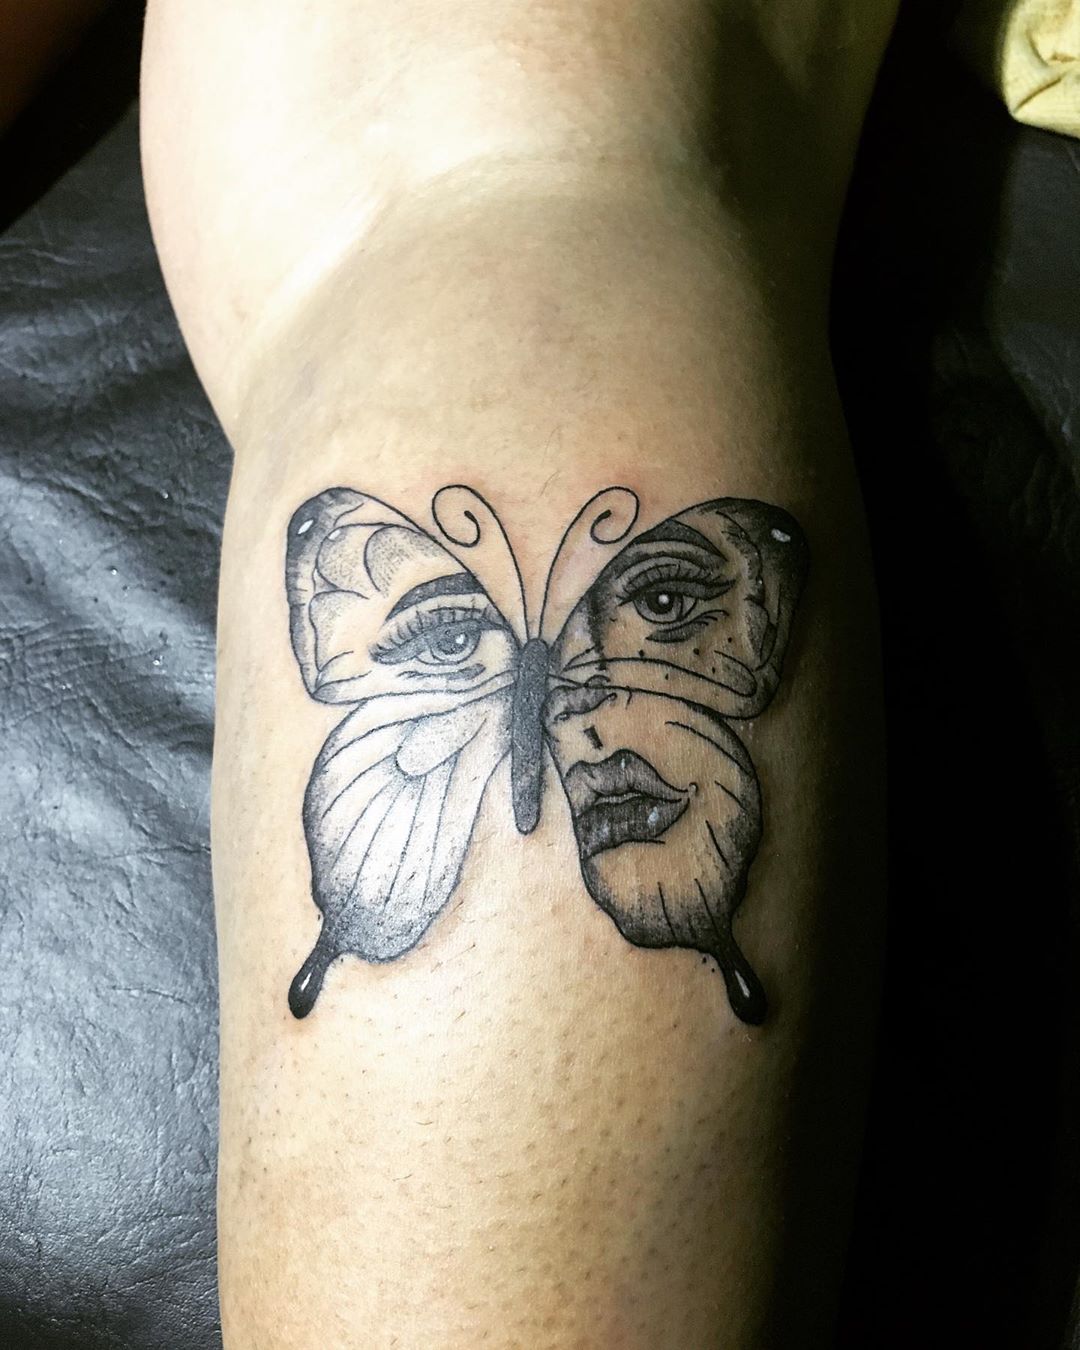 large black and grey tattoo on woman's lower leg of butterfly with woman's face inside wings